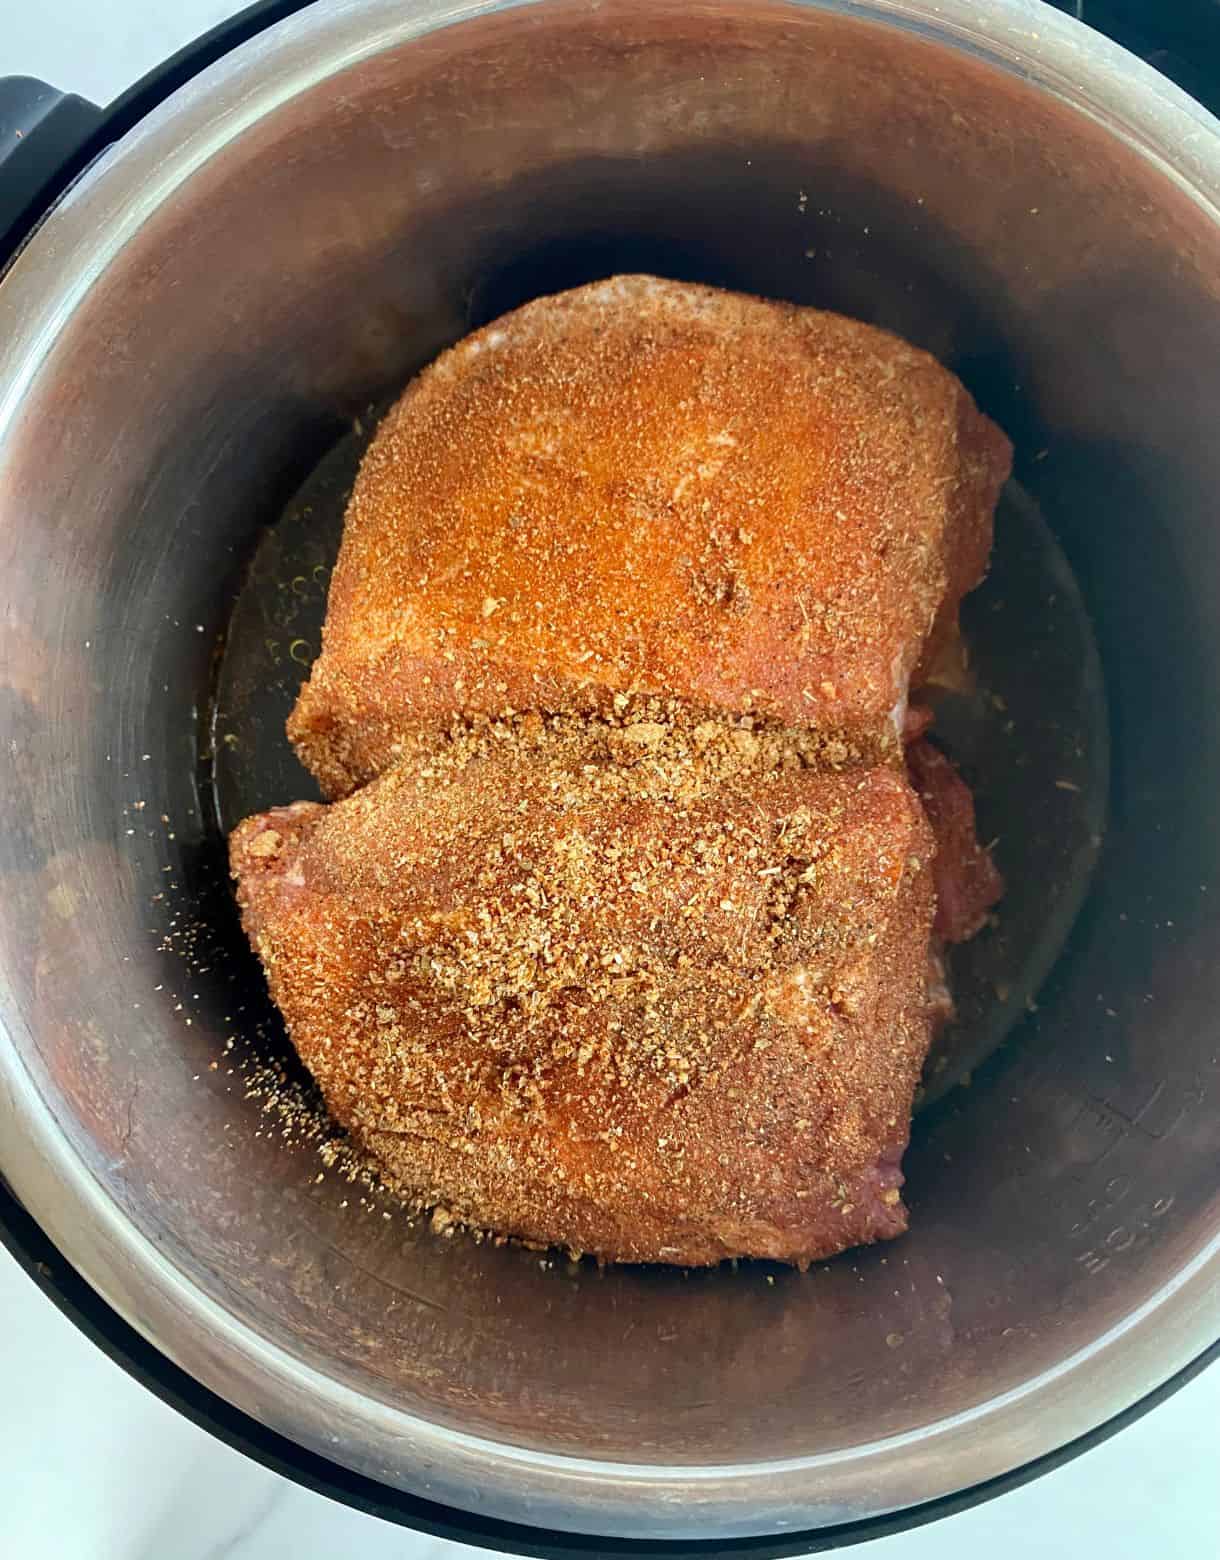 Two pieces of pork loin rubbed with spices and placed in a slow cooker.